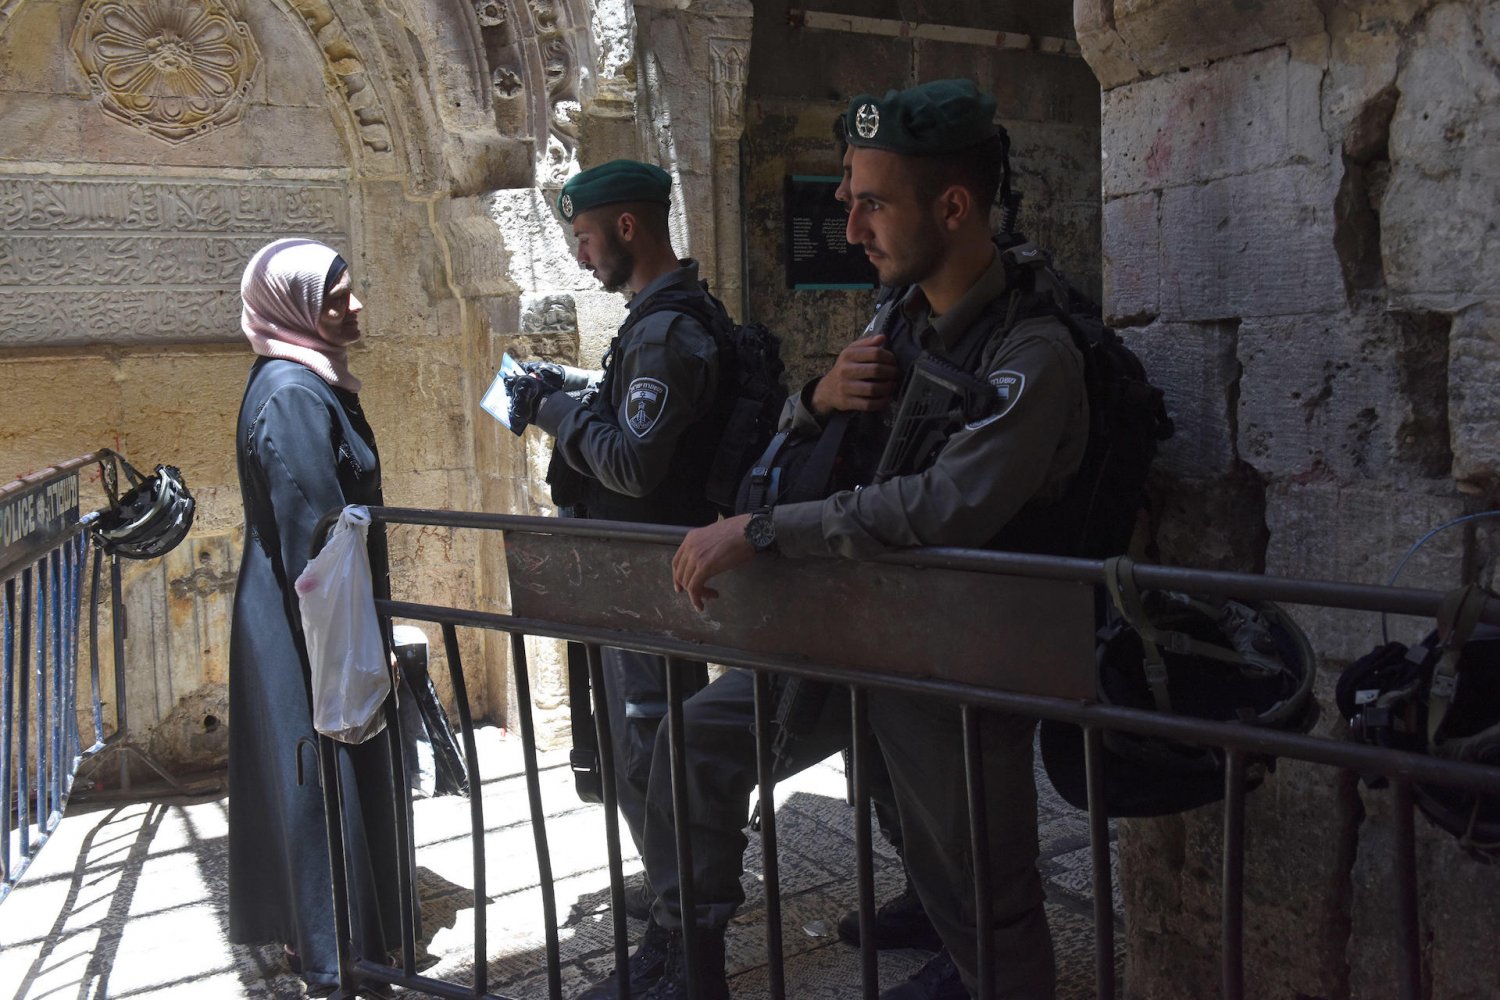 Israeli Border police checking a woman’s ID at a checkpoint in the Old City of Jerusalem, 2017